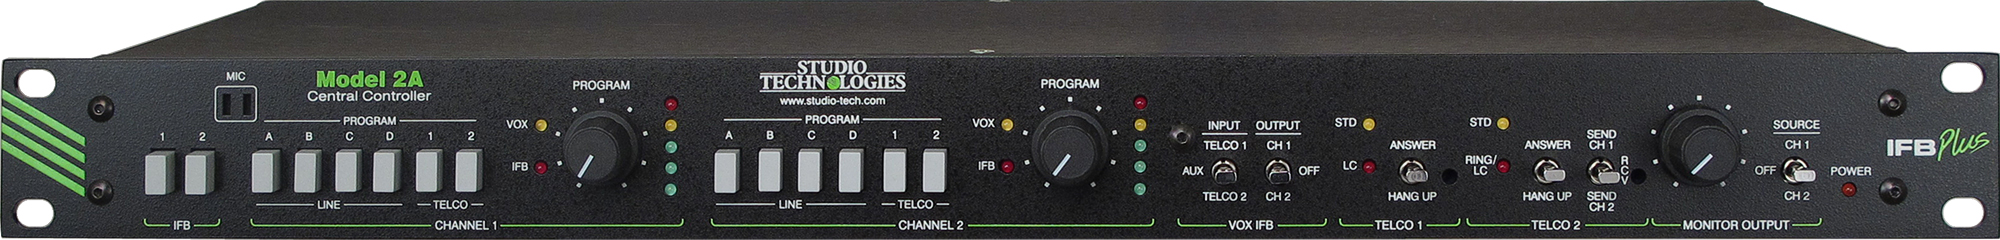 IFB Plus Model 2A 2-Channel Central Controller